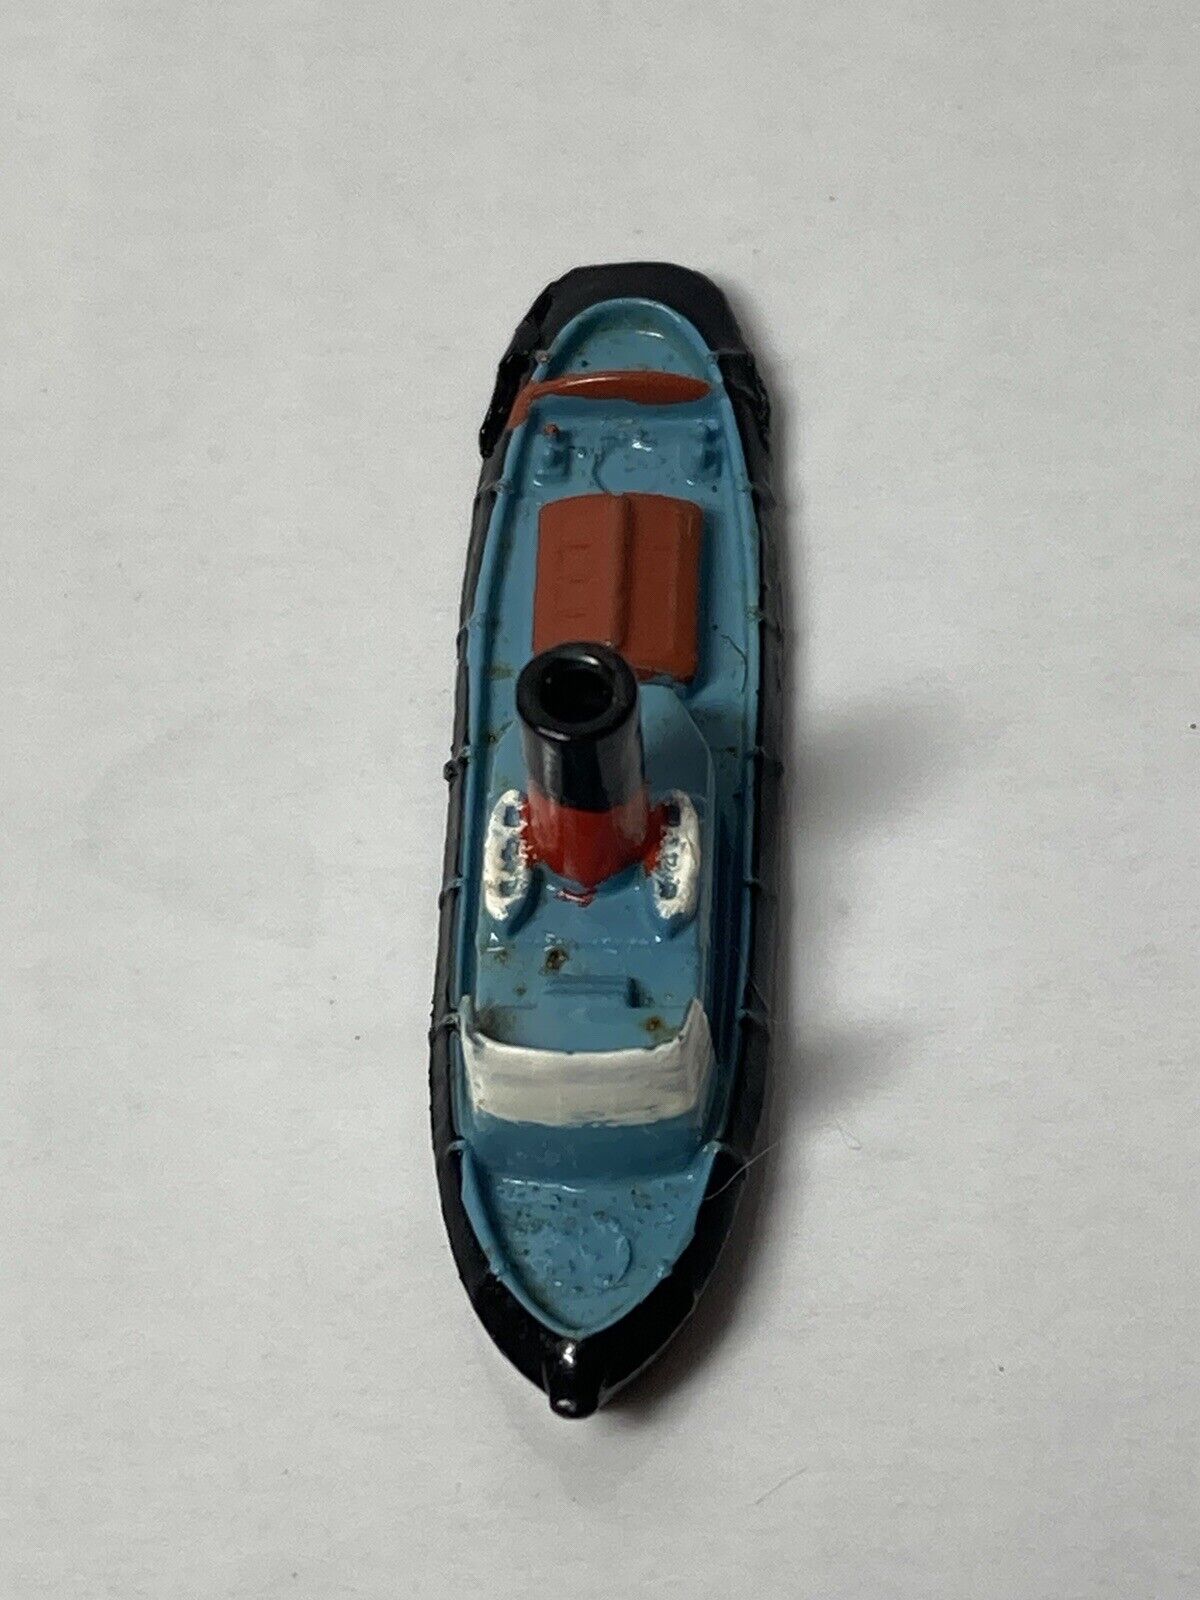 Tri-ang Ships Minic Tug M731 1:1200 Scale Rare Early Red Hollow Funnel Version